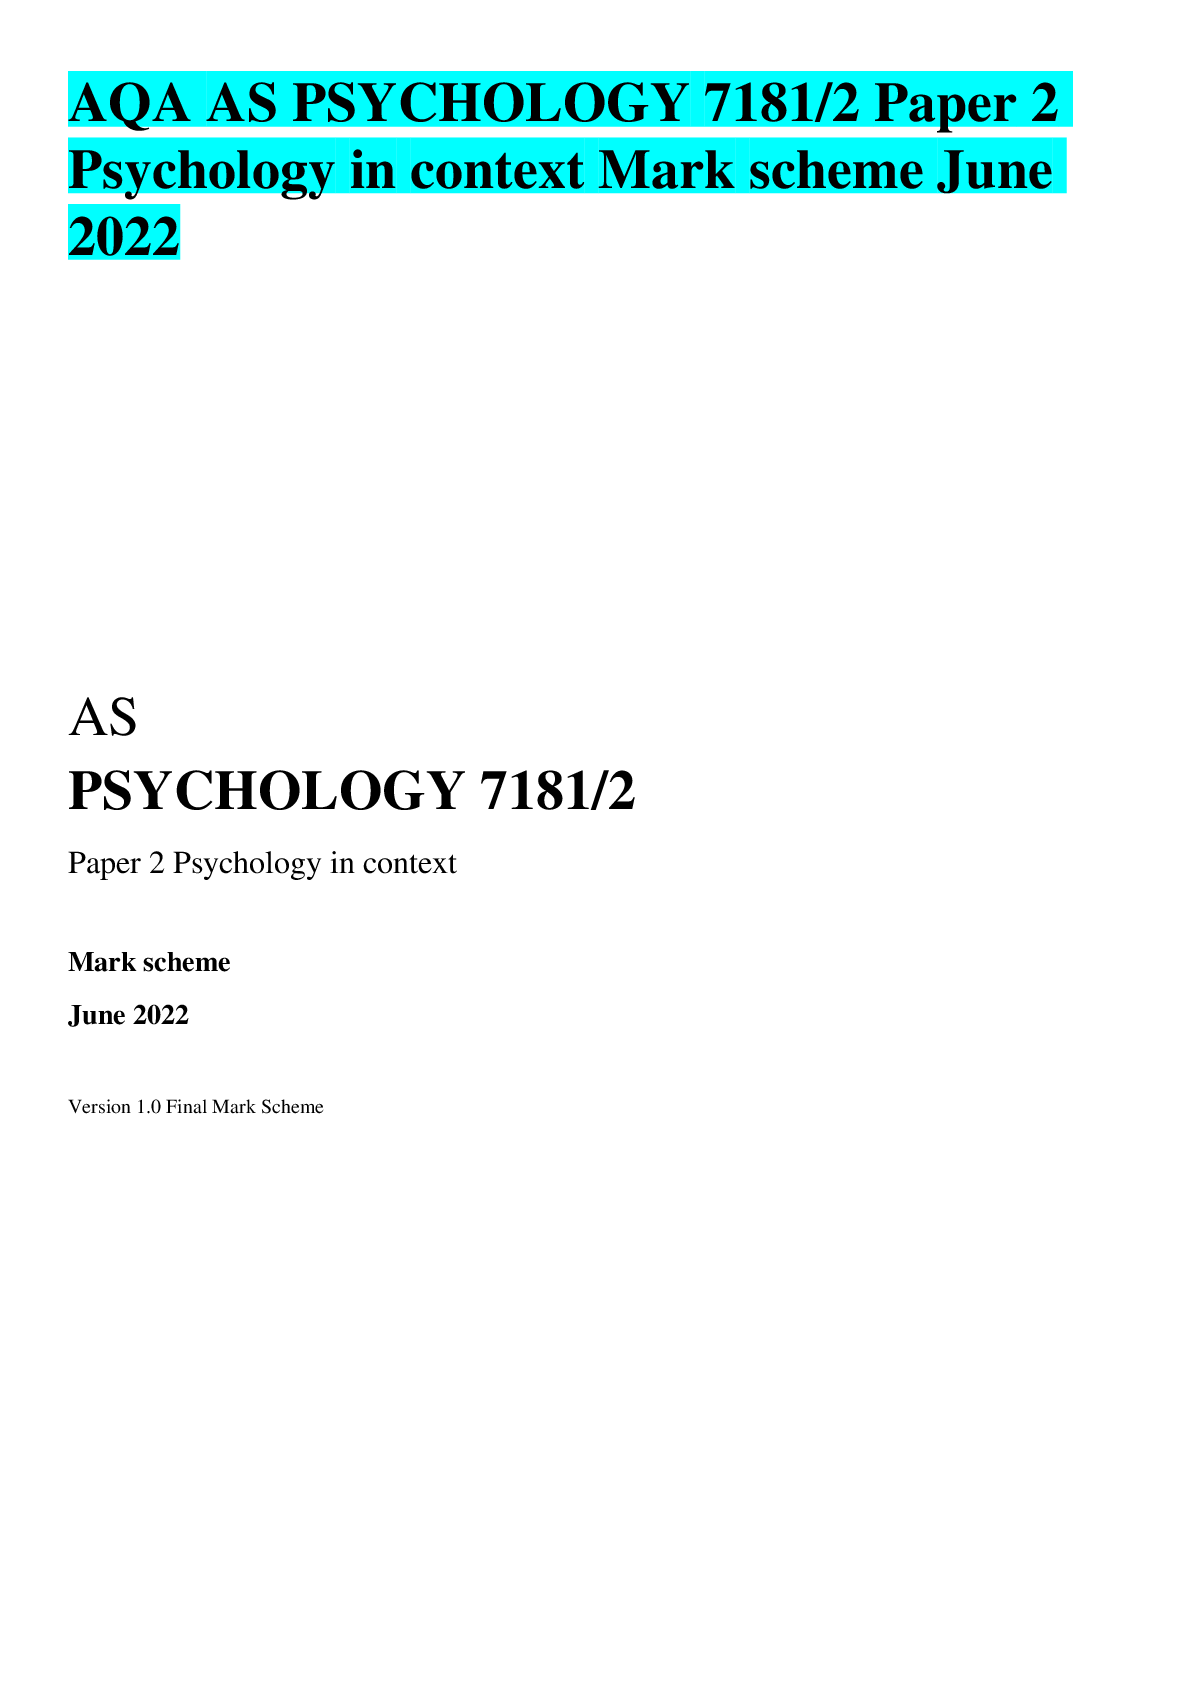 psychology as paper